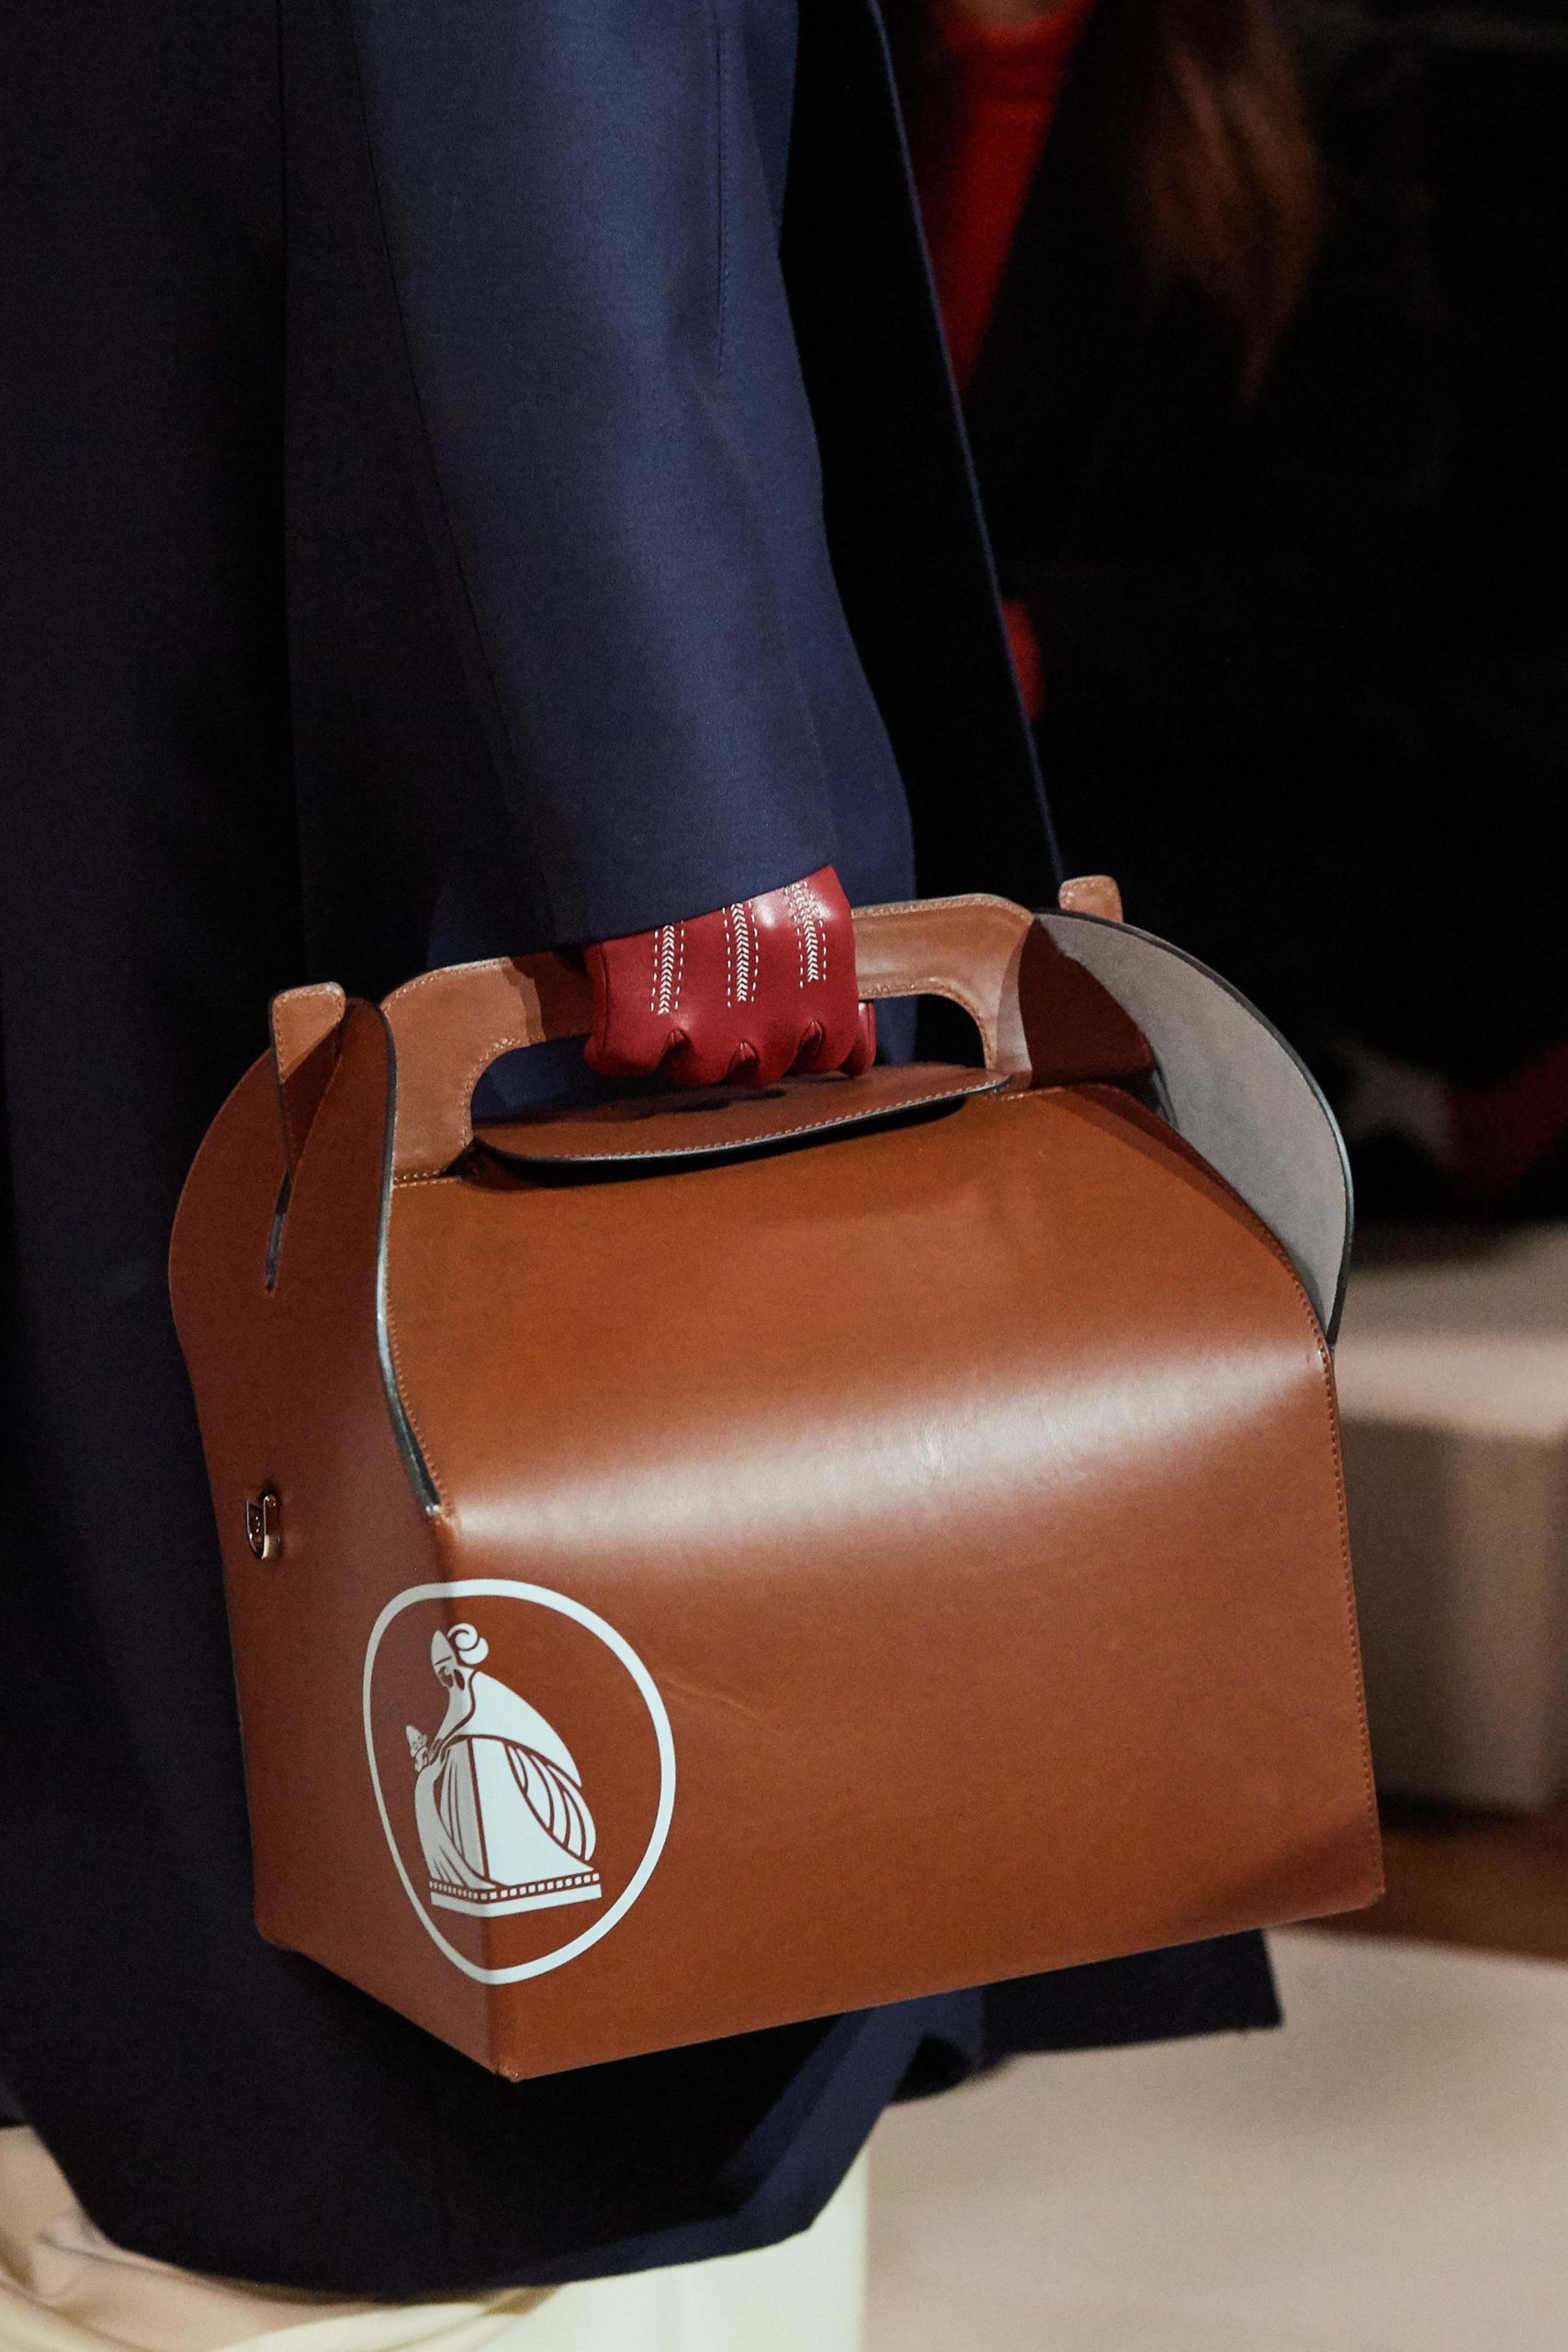 Lanvin Fall 2020 trends runway coverage Ready To Wear Vogue starbuck coffee bag